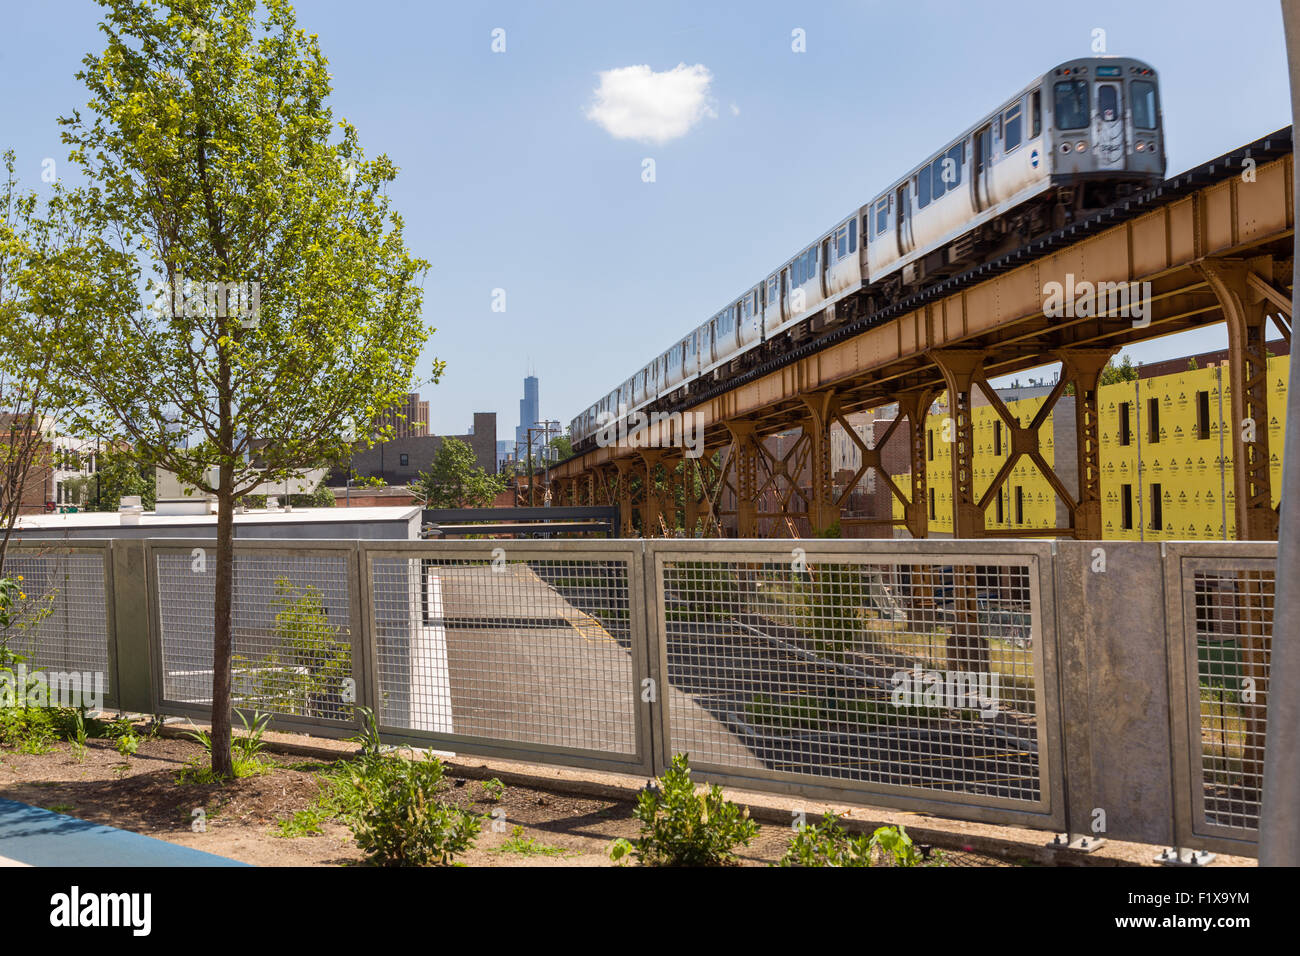 An L train on the Blue Line overpass at Milwaukee Avenue along the 606 elevated bike trail, green space and park built on the old Bloomingdale Line in the Wicker Park neighborhood in Chicago, Illinois, USA Stock Photo